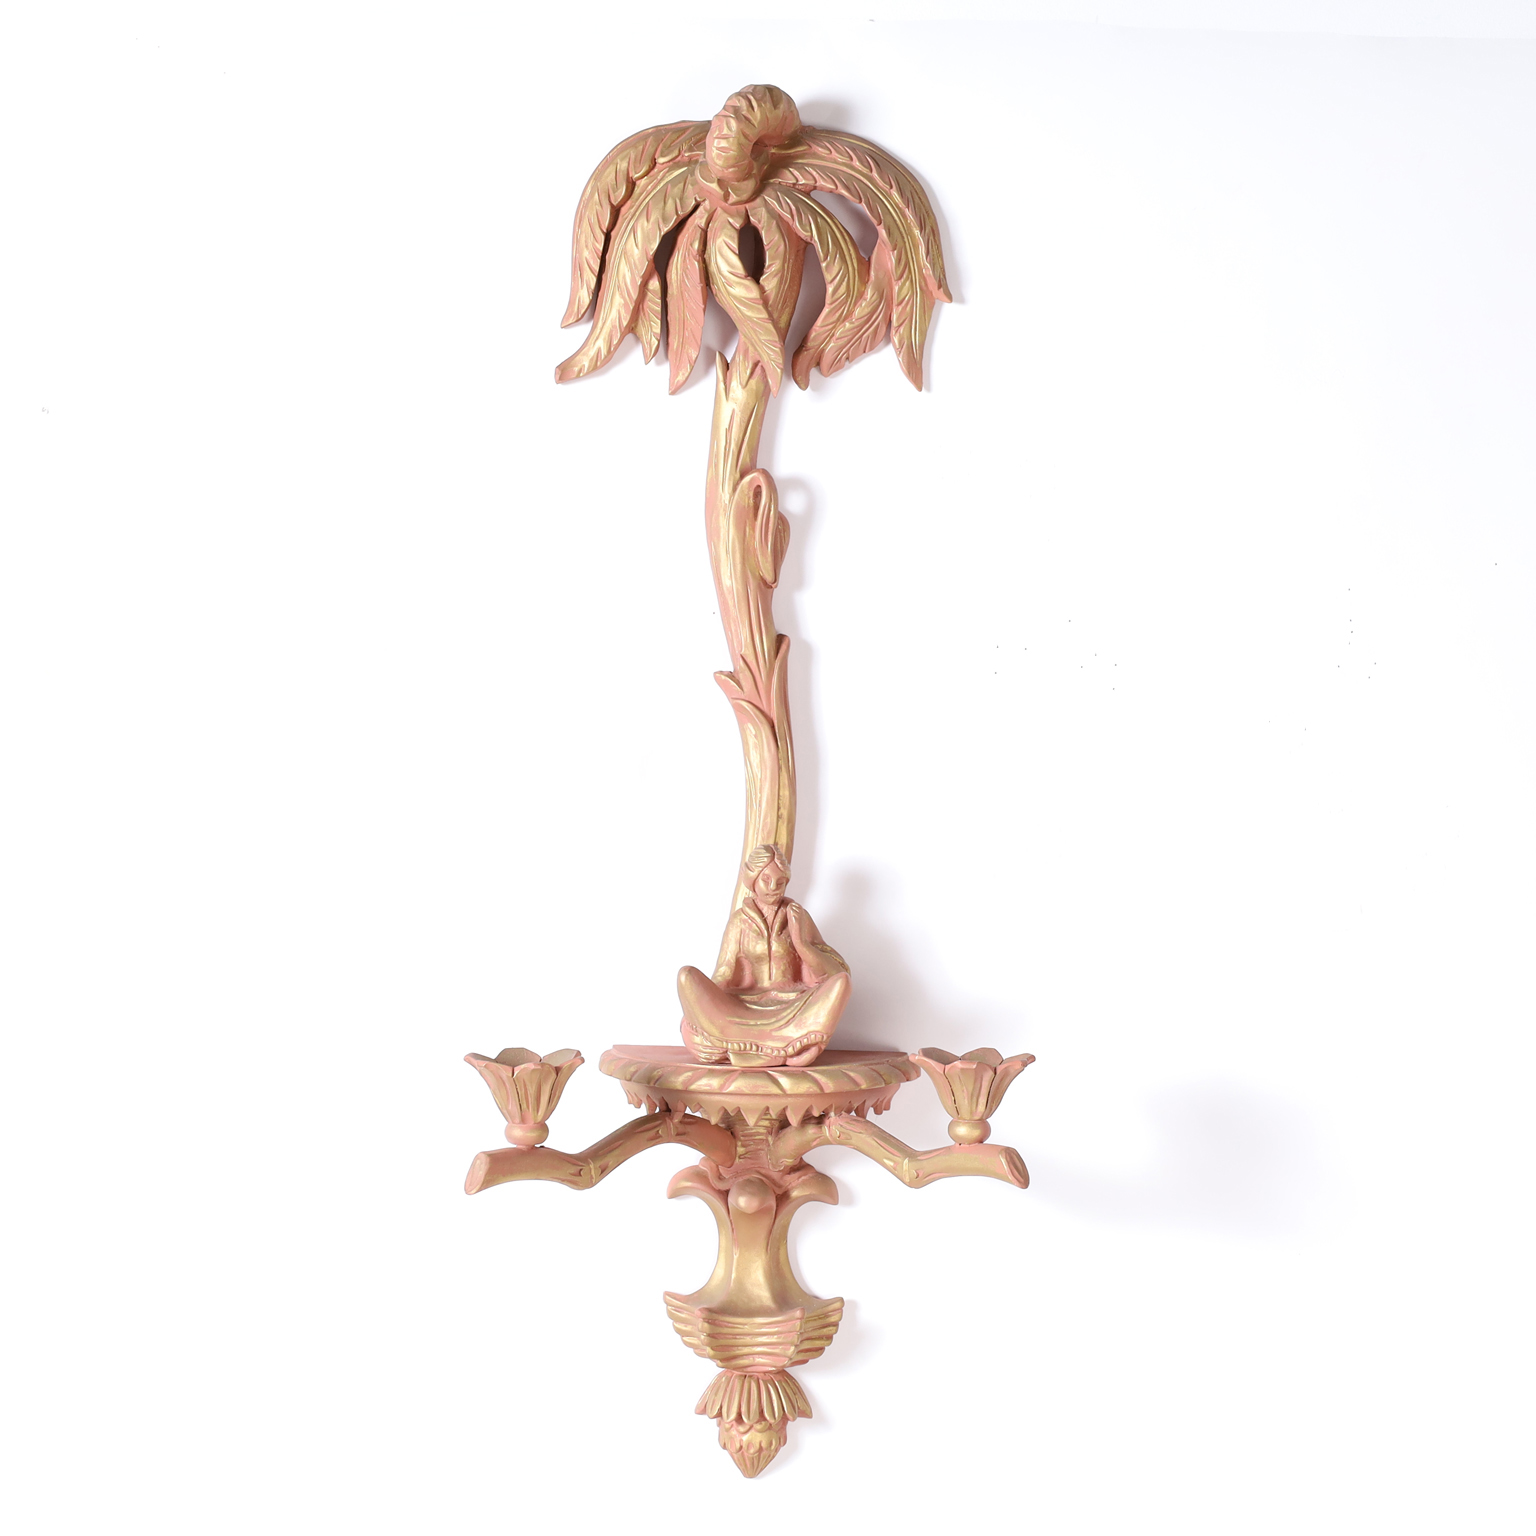 Pair of Carved Wood Palm Tree Chinoiserie Wall Sconces